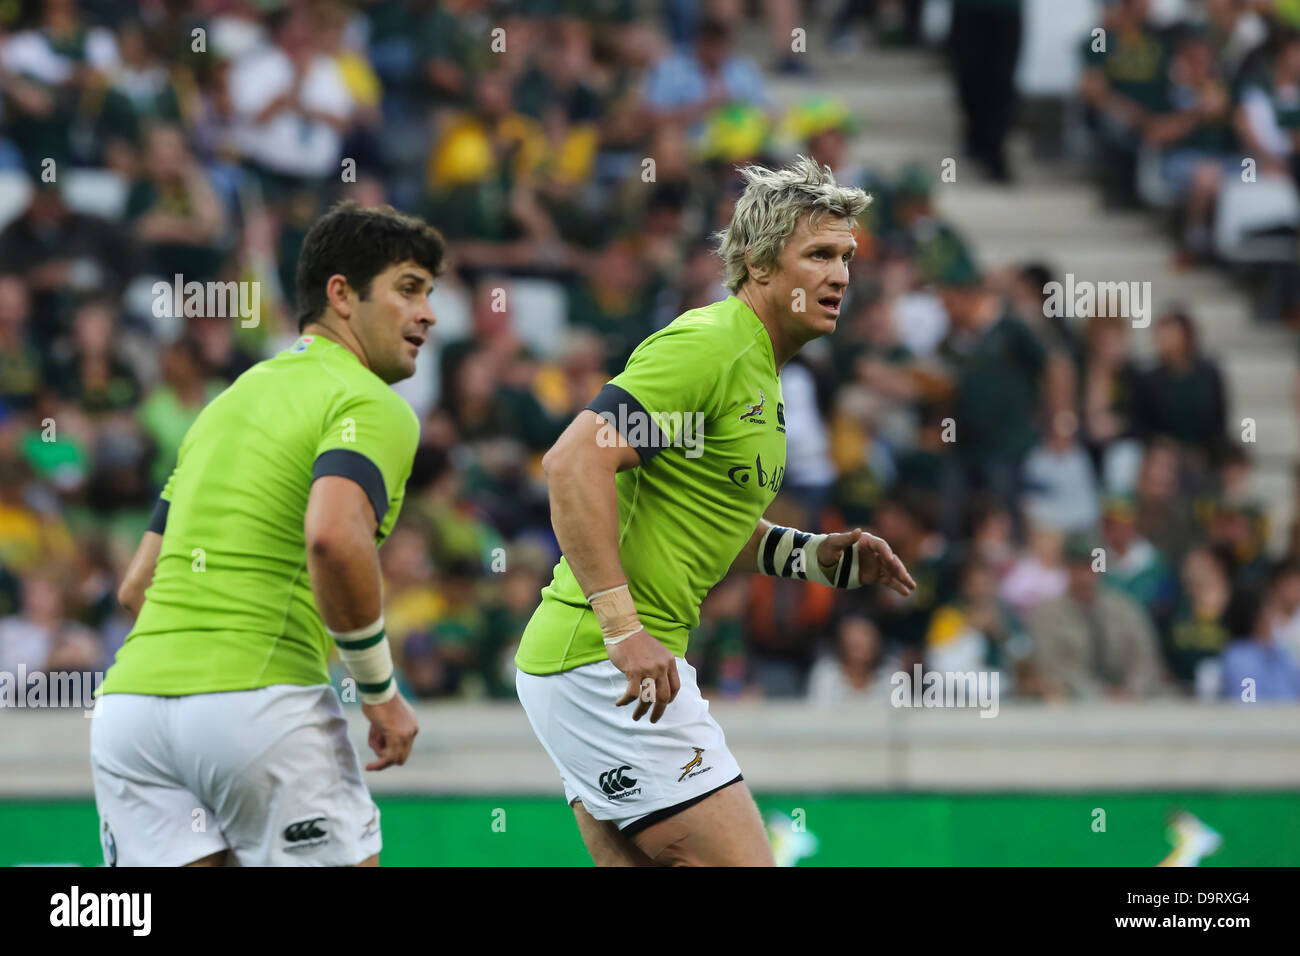 Jean de Villiers and Morne Steyn during warm-ups before the rugby test against Scotland at Mbombela Stock Photo